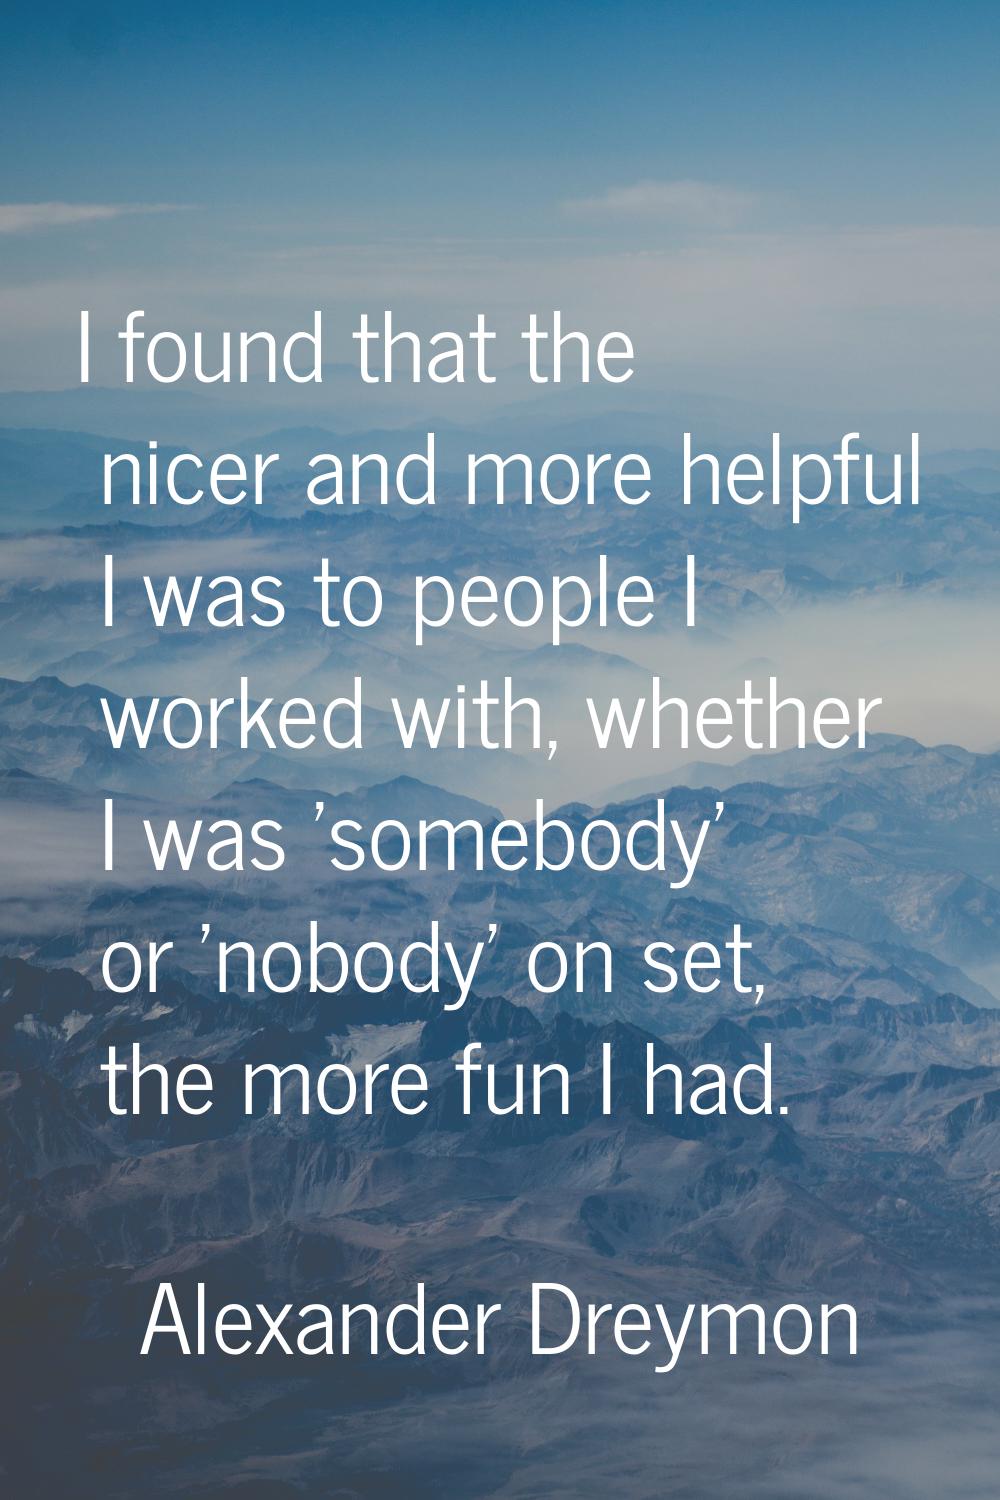 I found that the nicer and more helpful I was to people I worked with, whether I was 'somebody' or 